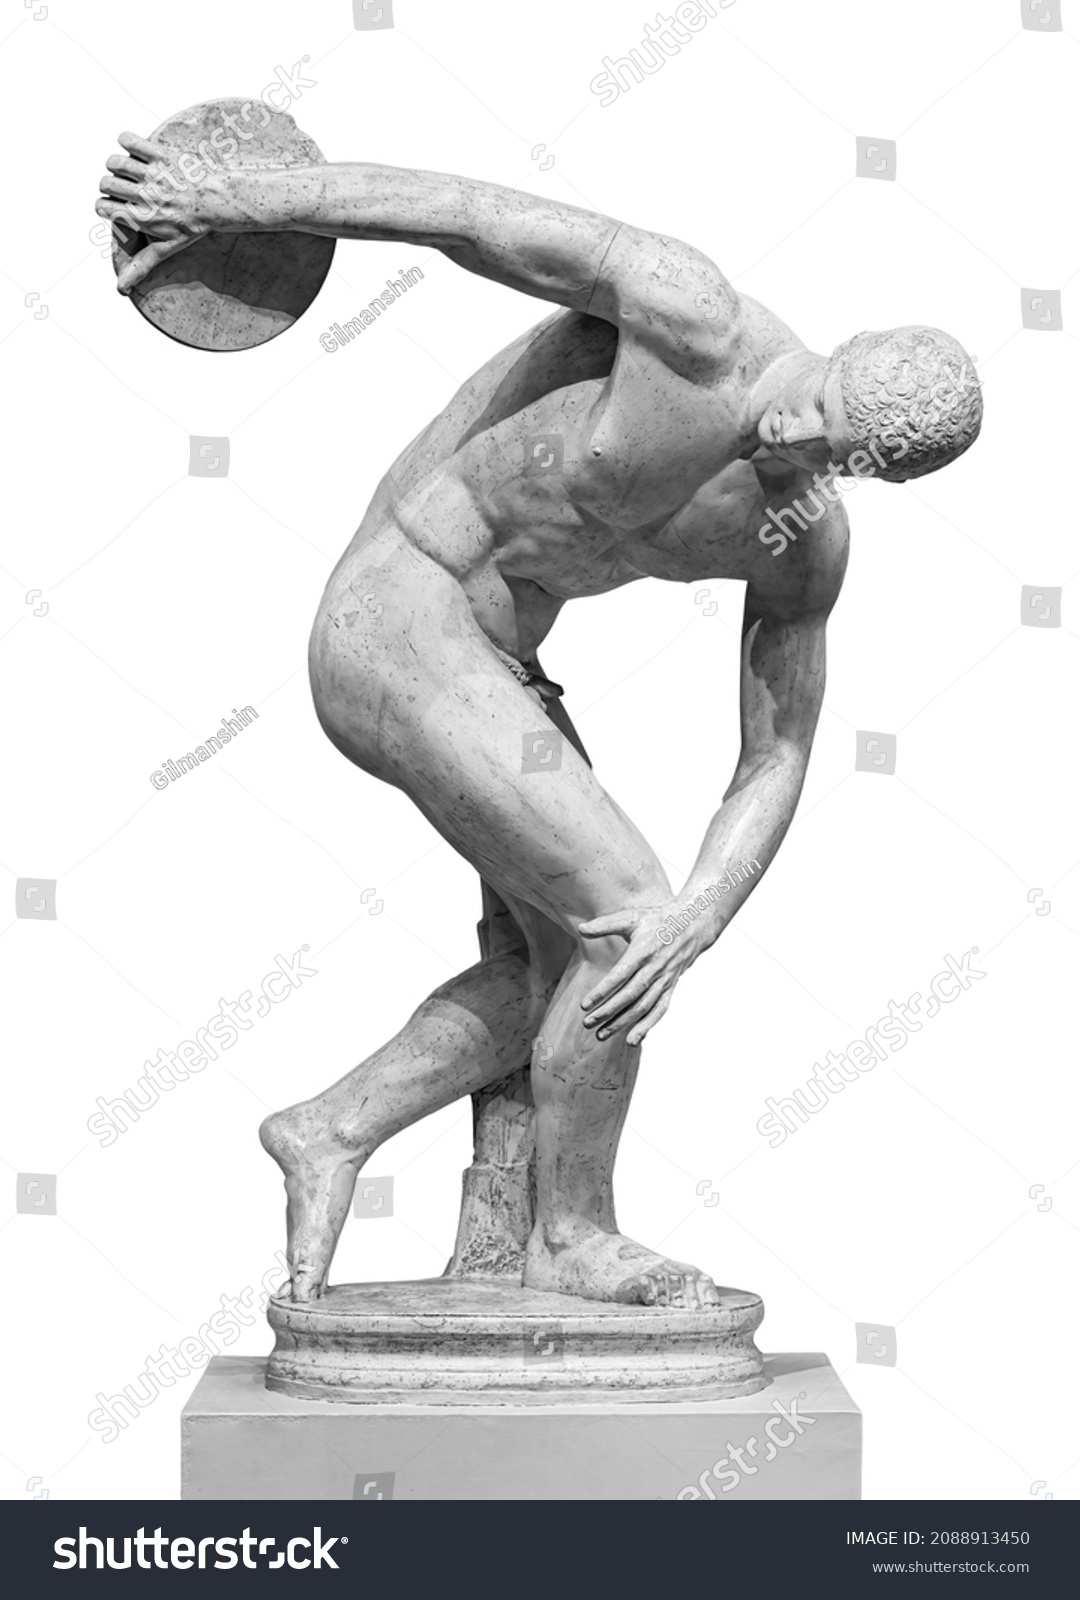 Discus thrower discobolus statue. A part of the ancient Olymp games. A Roman copy of the lost bronze Greek sculpture. Isolated on white background #2088913450